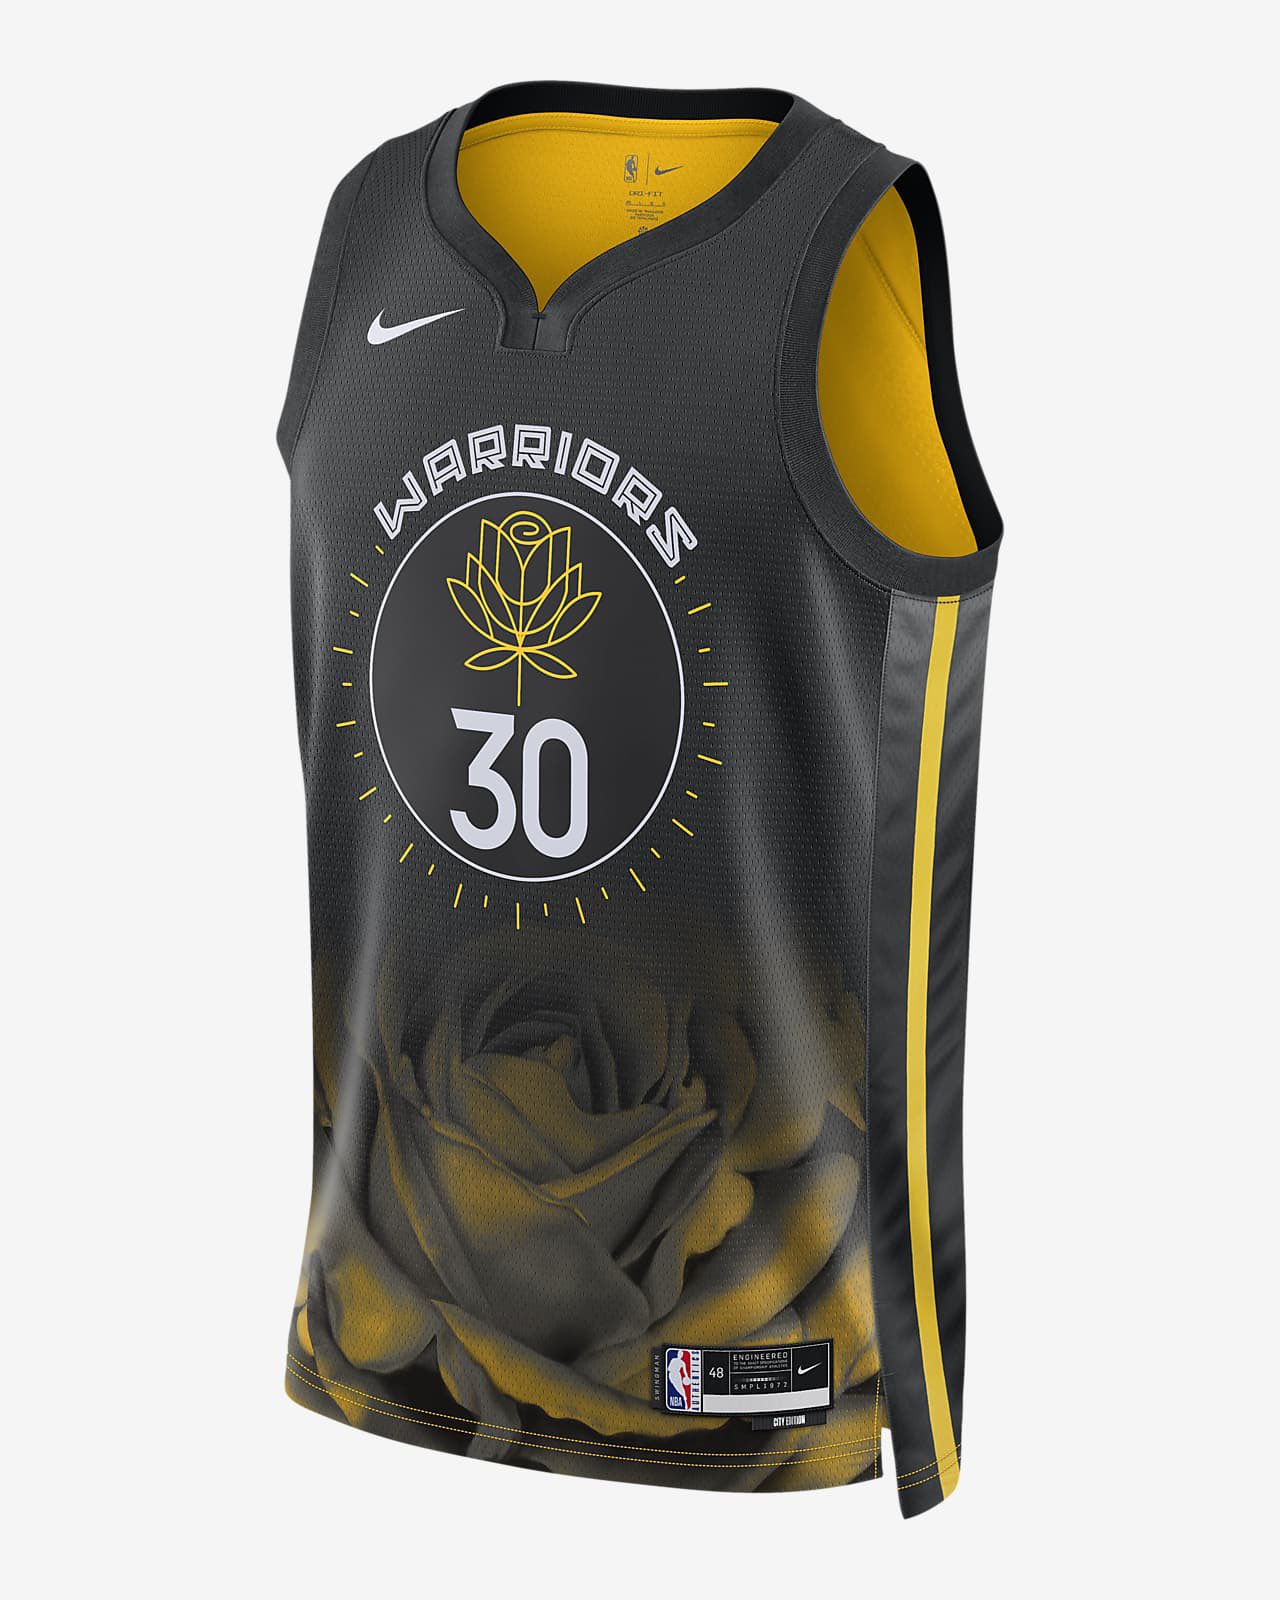 Lotus Flower Inspired Golden State Warriors 202223 City Jersey Leaked